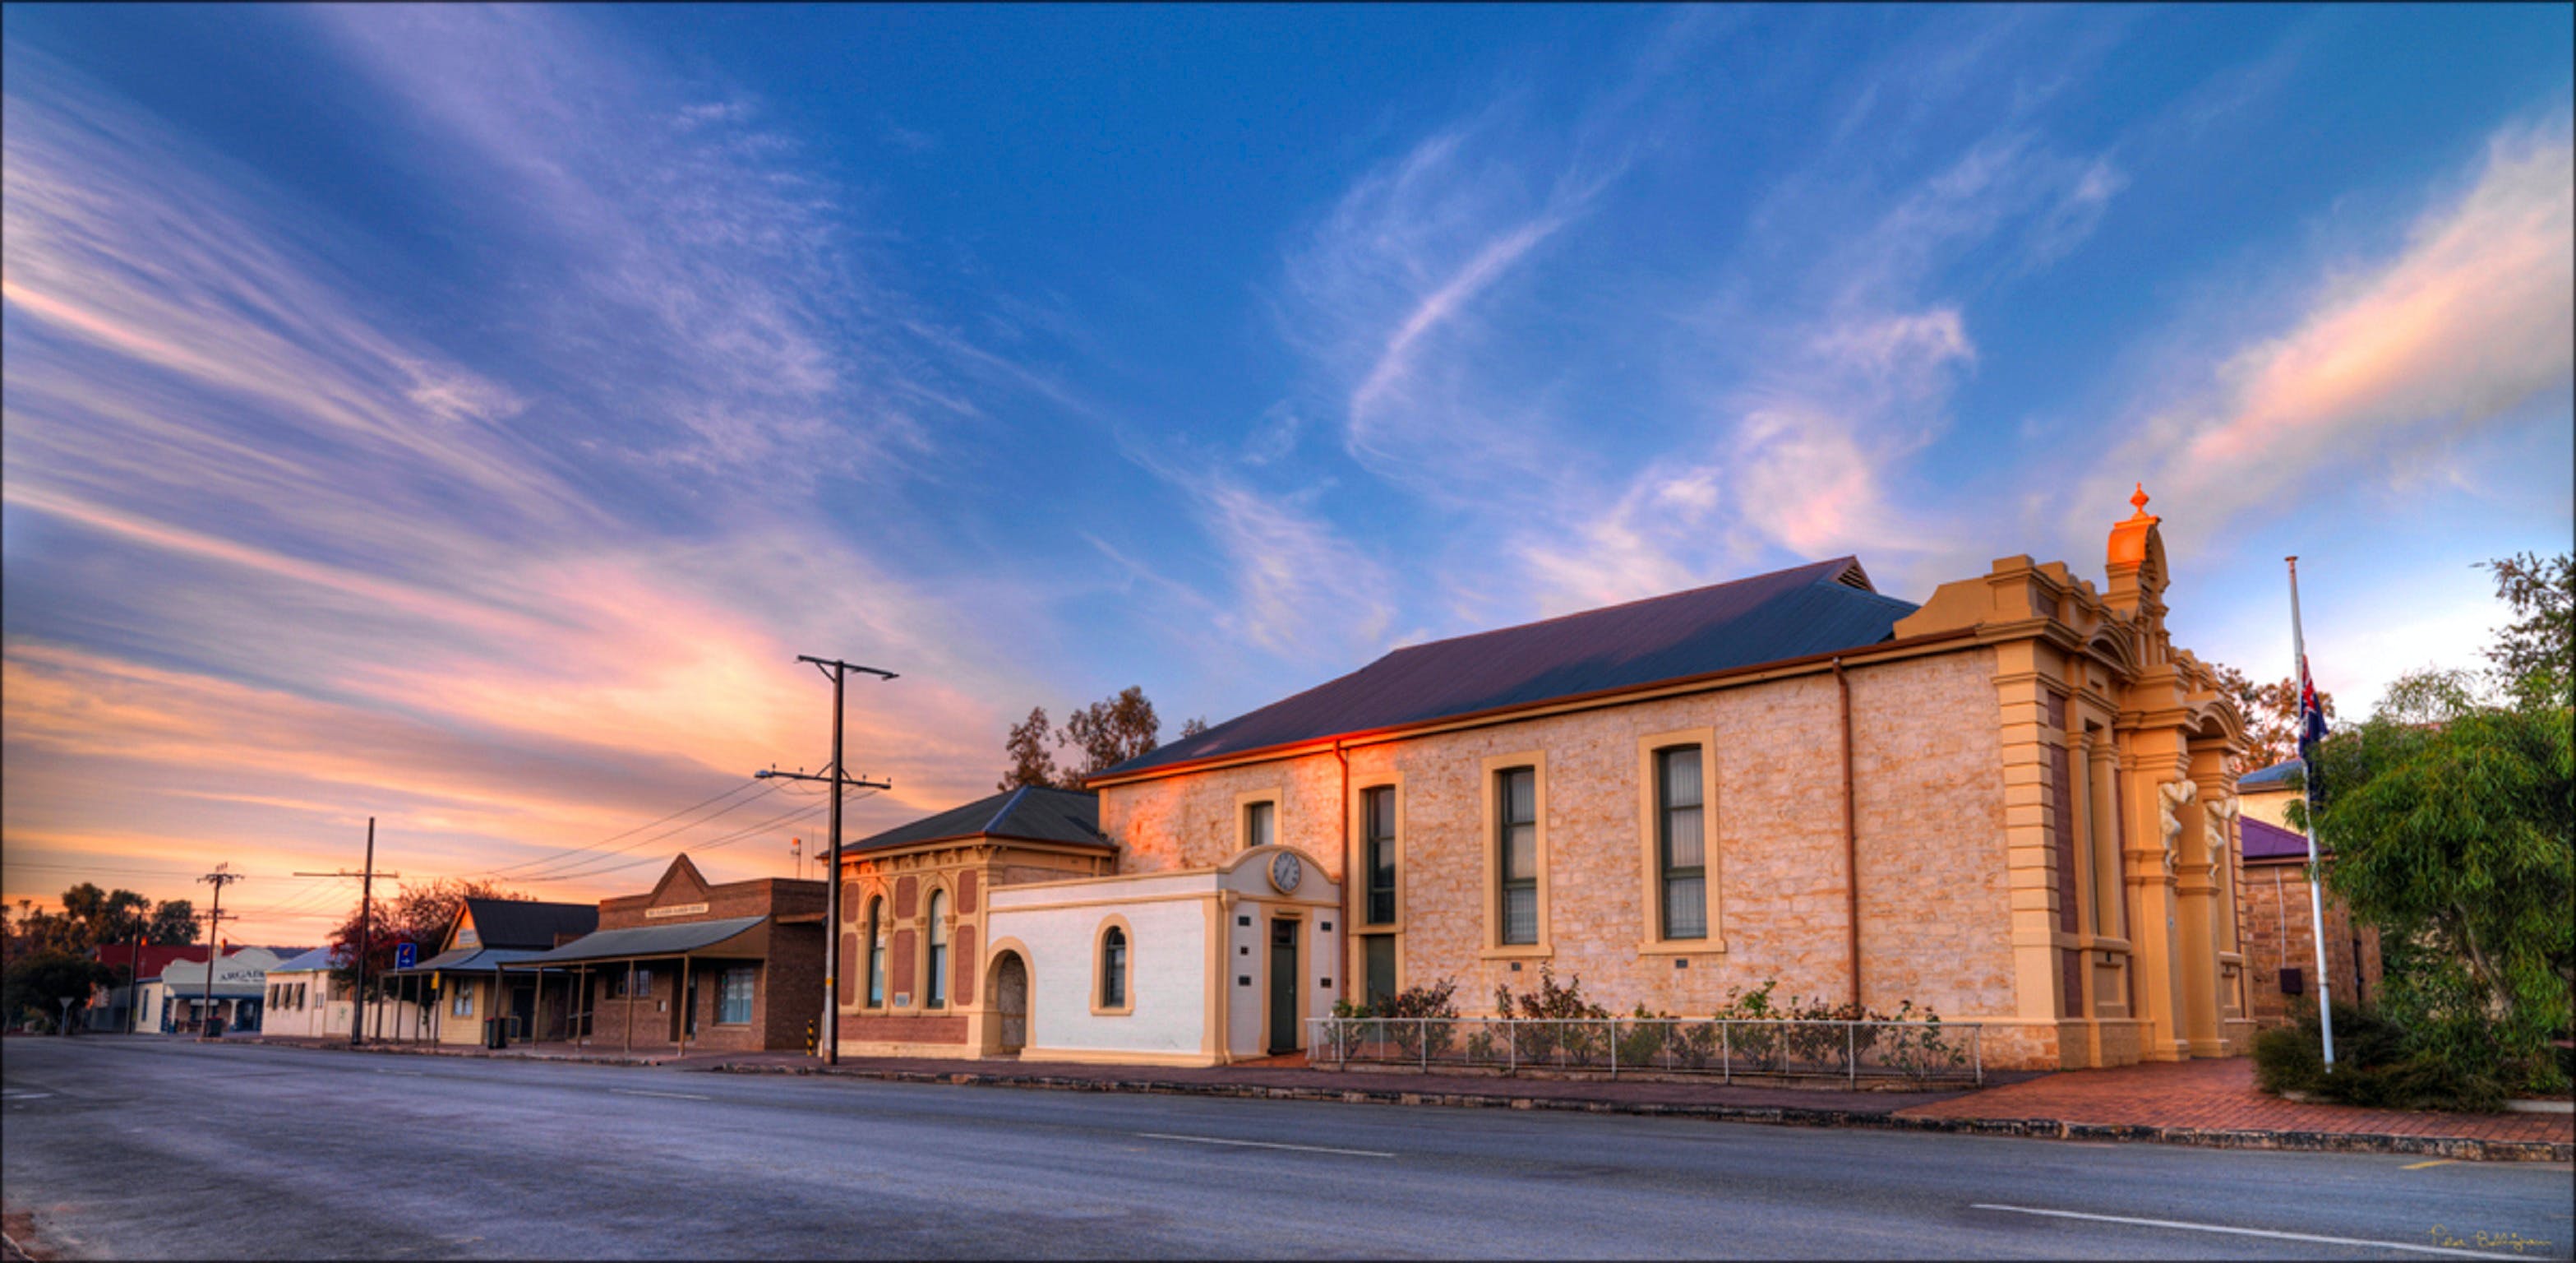 Quorn Historic Building Walk - Accommodation Adelaide